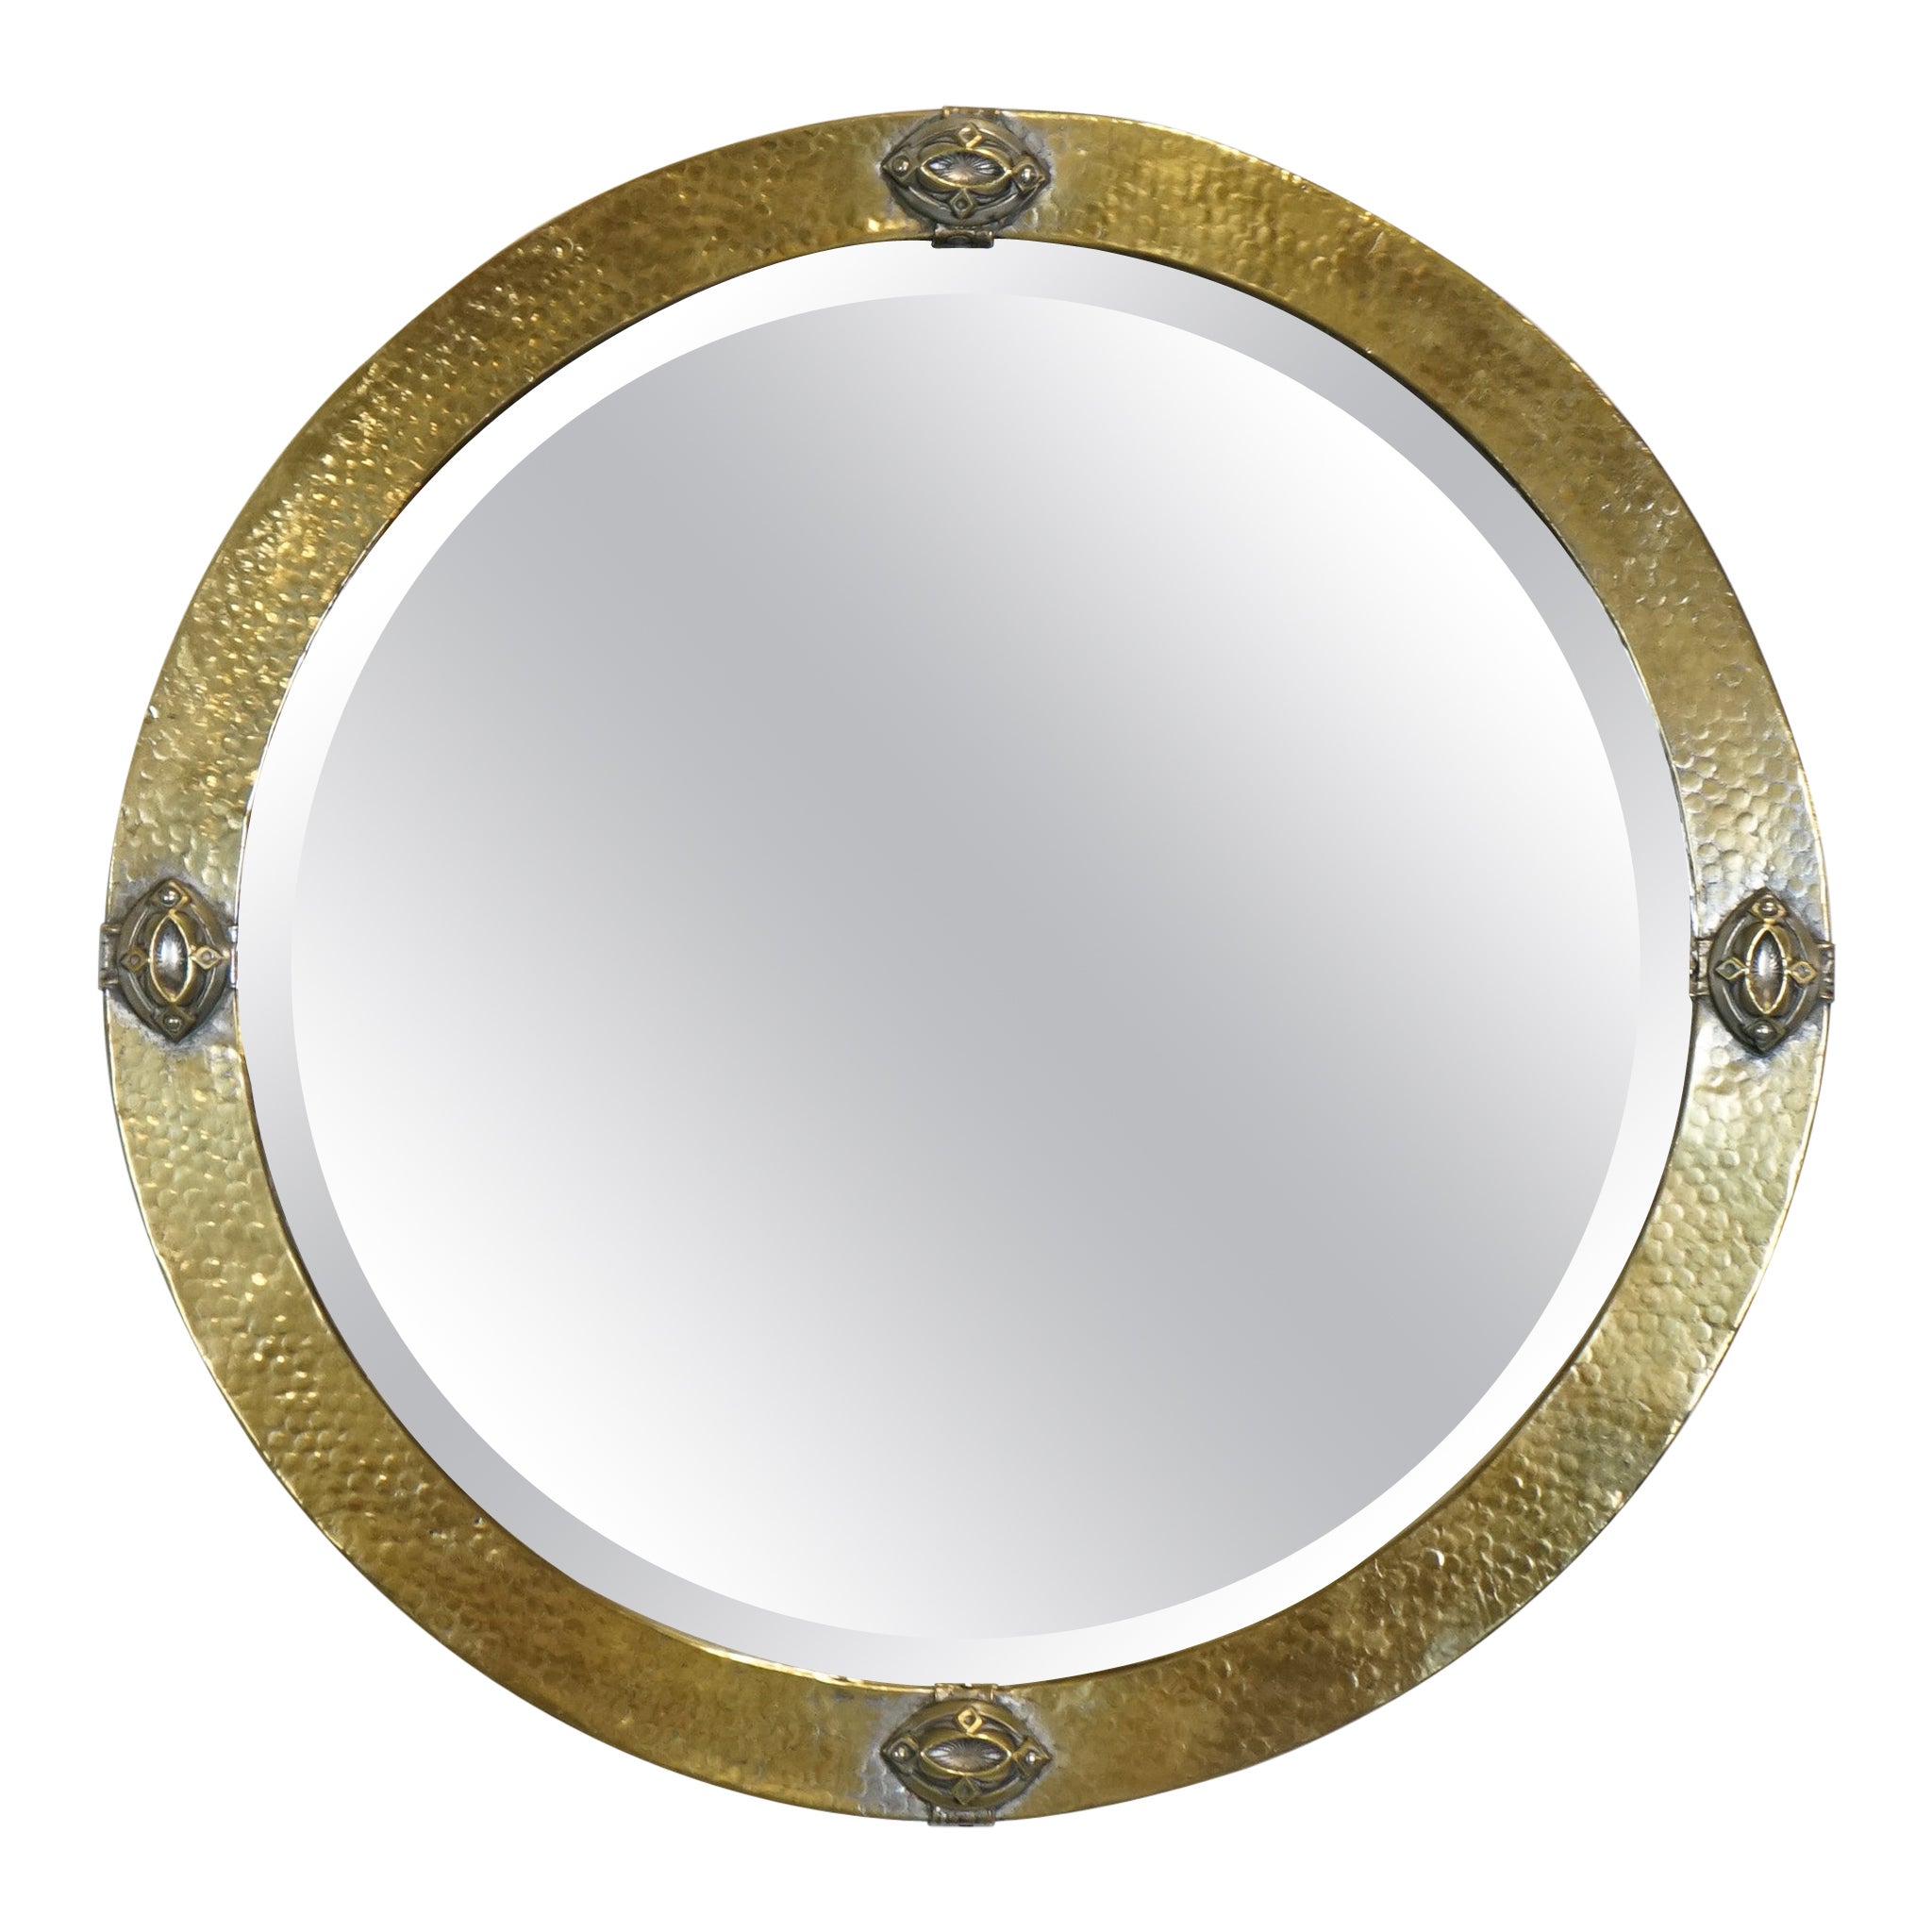 ARTS & CRAFTS LIBERTYS OF LONDON HAMMERED BRASS WALL MIRROR CiRCA 1910 For Sale